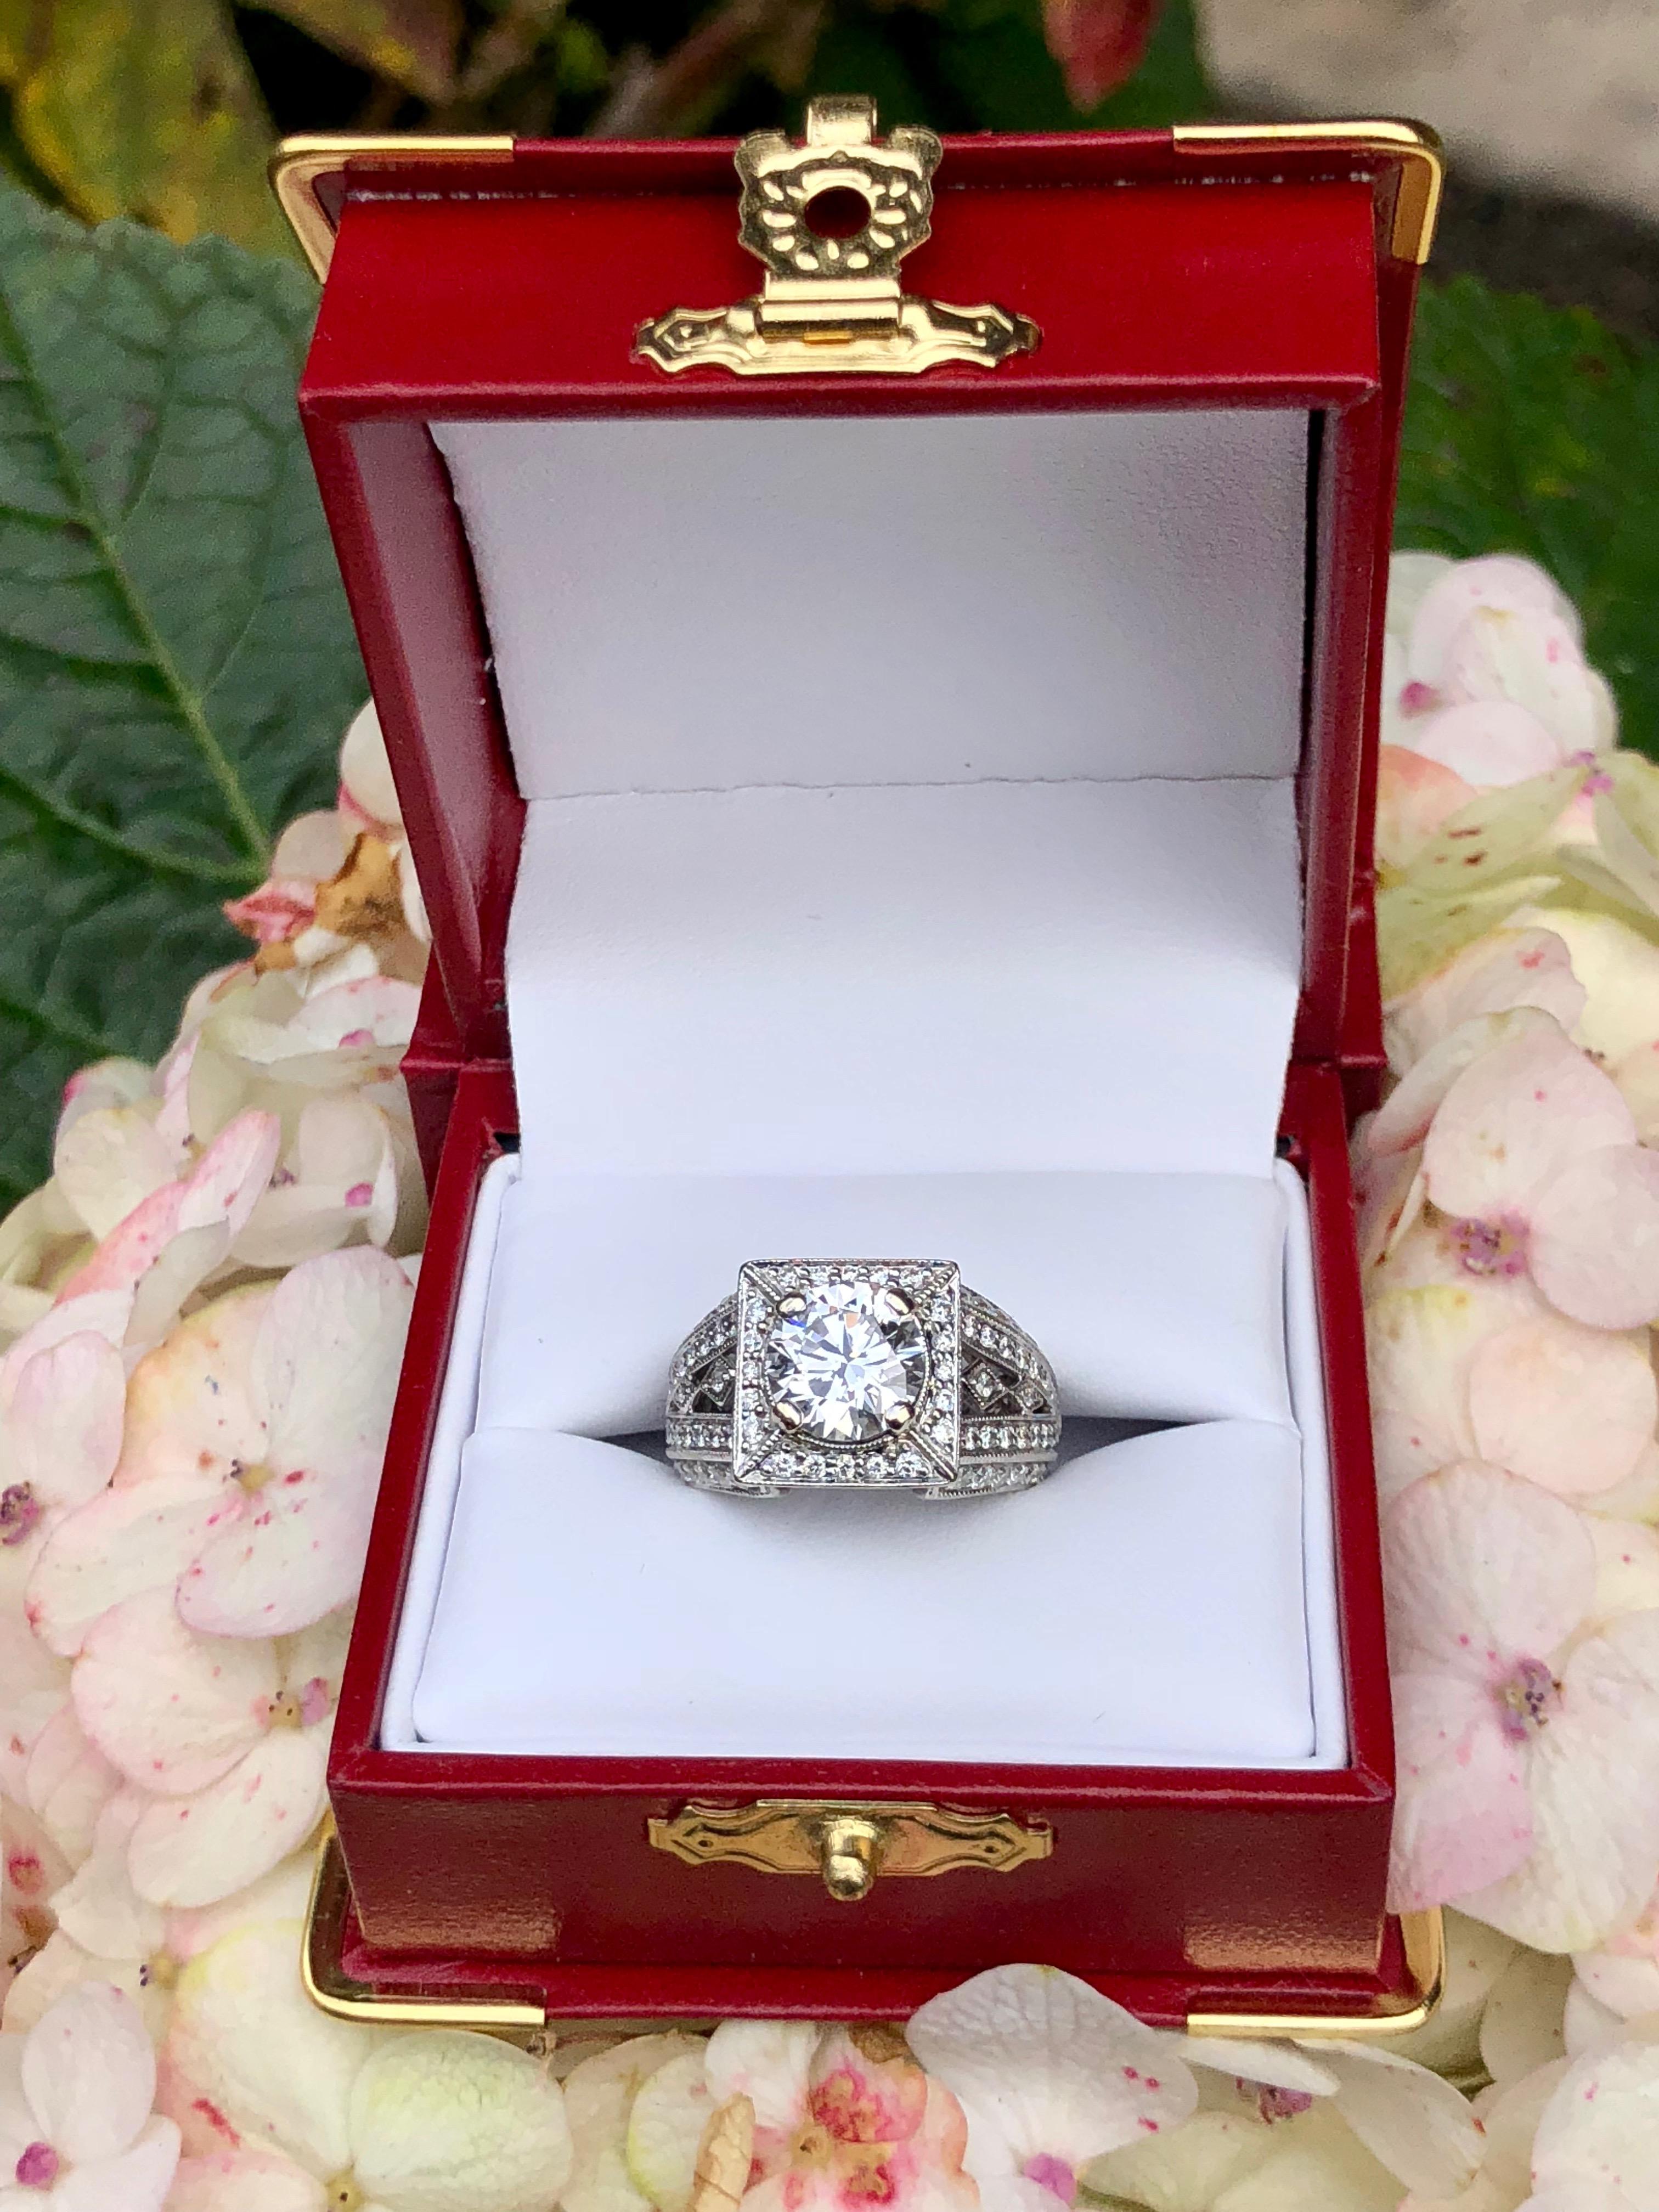 Absolutely stunning, GIA Certified 1.85 Carat VVS2 clarity and F color (colorless) round brilliant diamond set in a custom made, 18 karat white gold, eternity-style engagement, wedding or bridal ring will make someone very happy!

GIA Report #